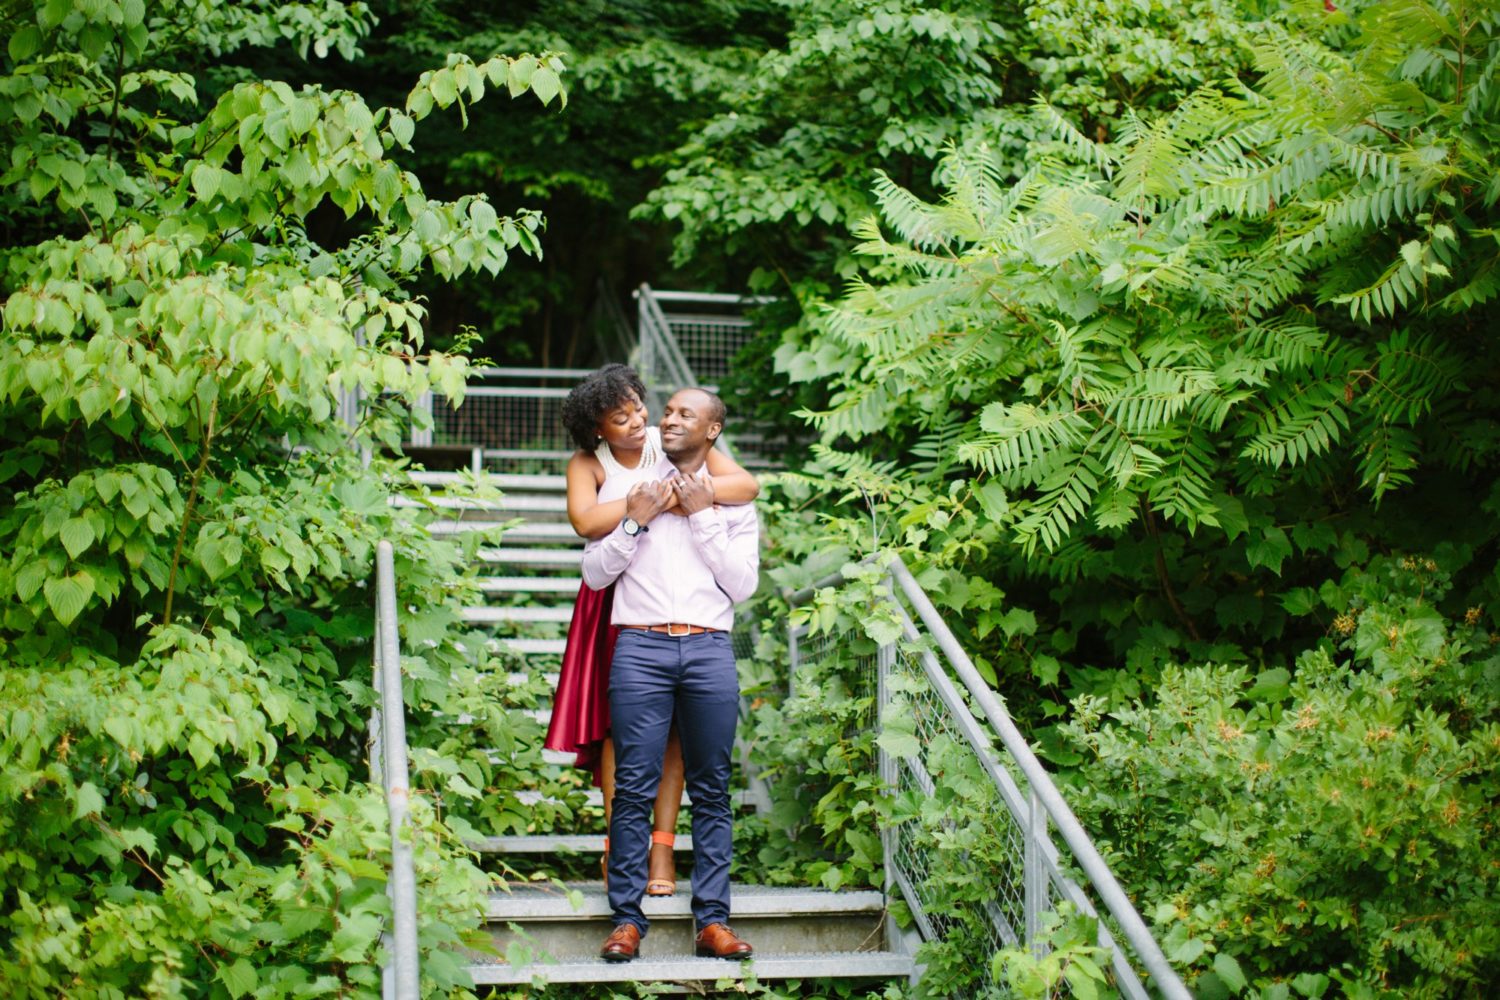 A couple standing on a metal staircase with green trees surrounding them at Evergreen Brickworks. The woman has her arms around her fiancés shoulders.